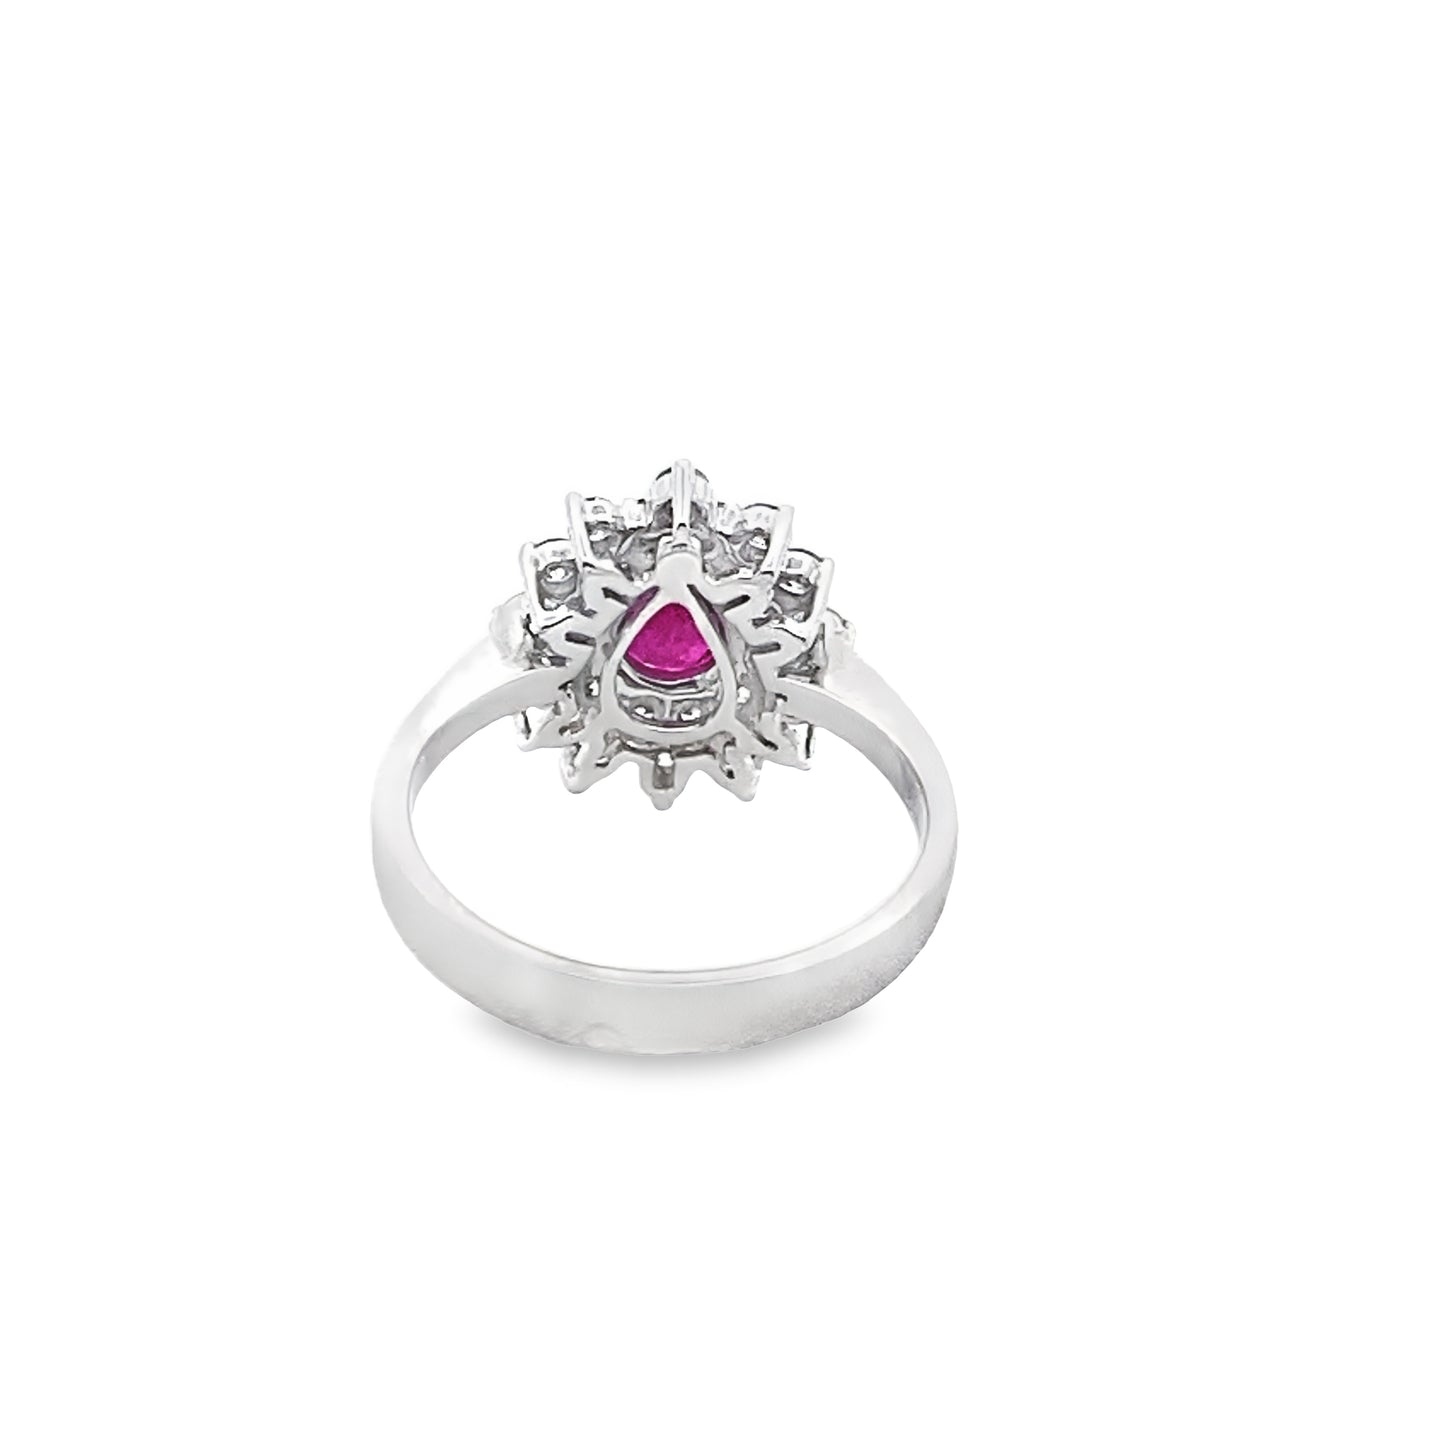 Pear-Cut Ruby Ring with Diamond Halo in 18K White Gold